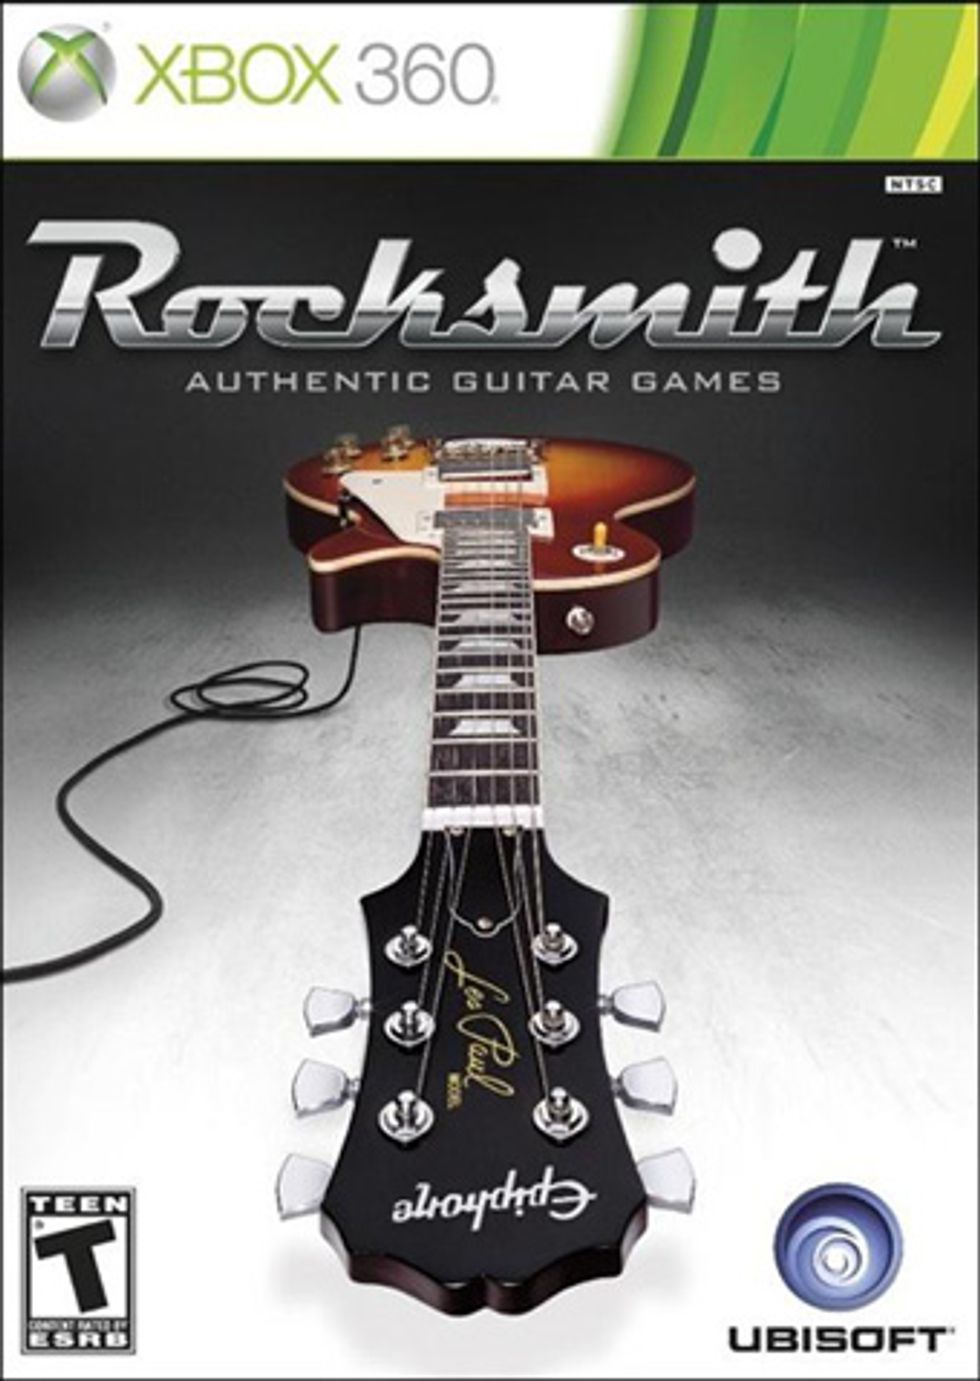 Coming Soon: Rocksmith, to Cultivate Your Inner Rock Star (by Teaching You Guitar)